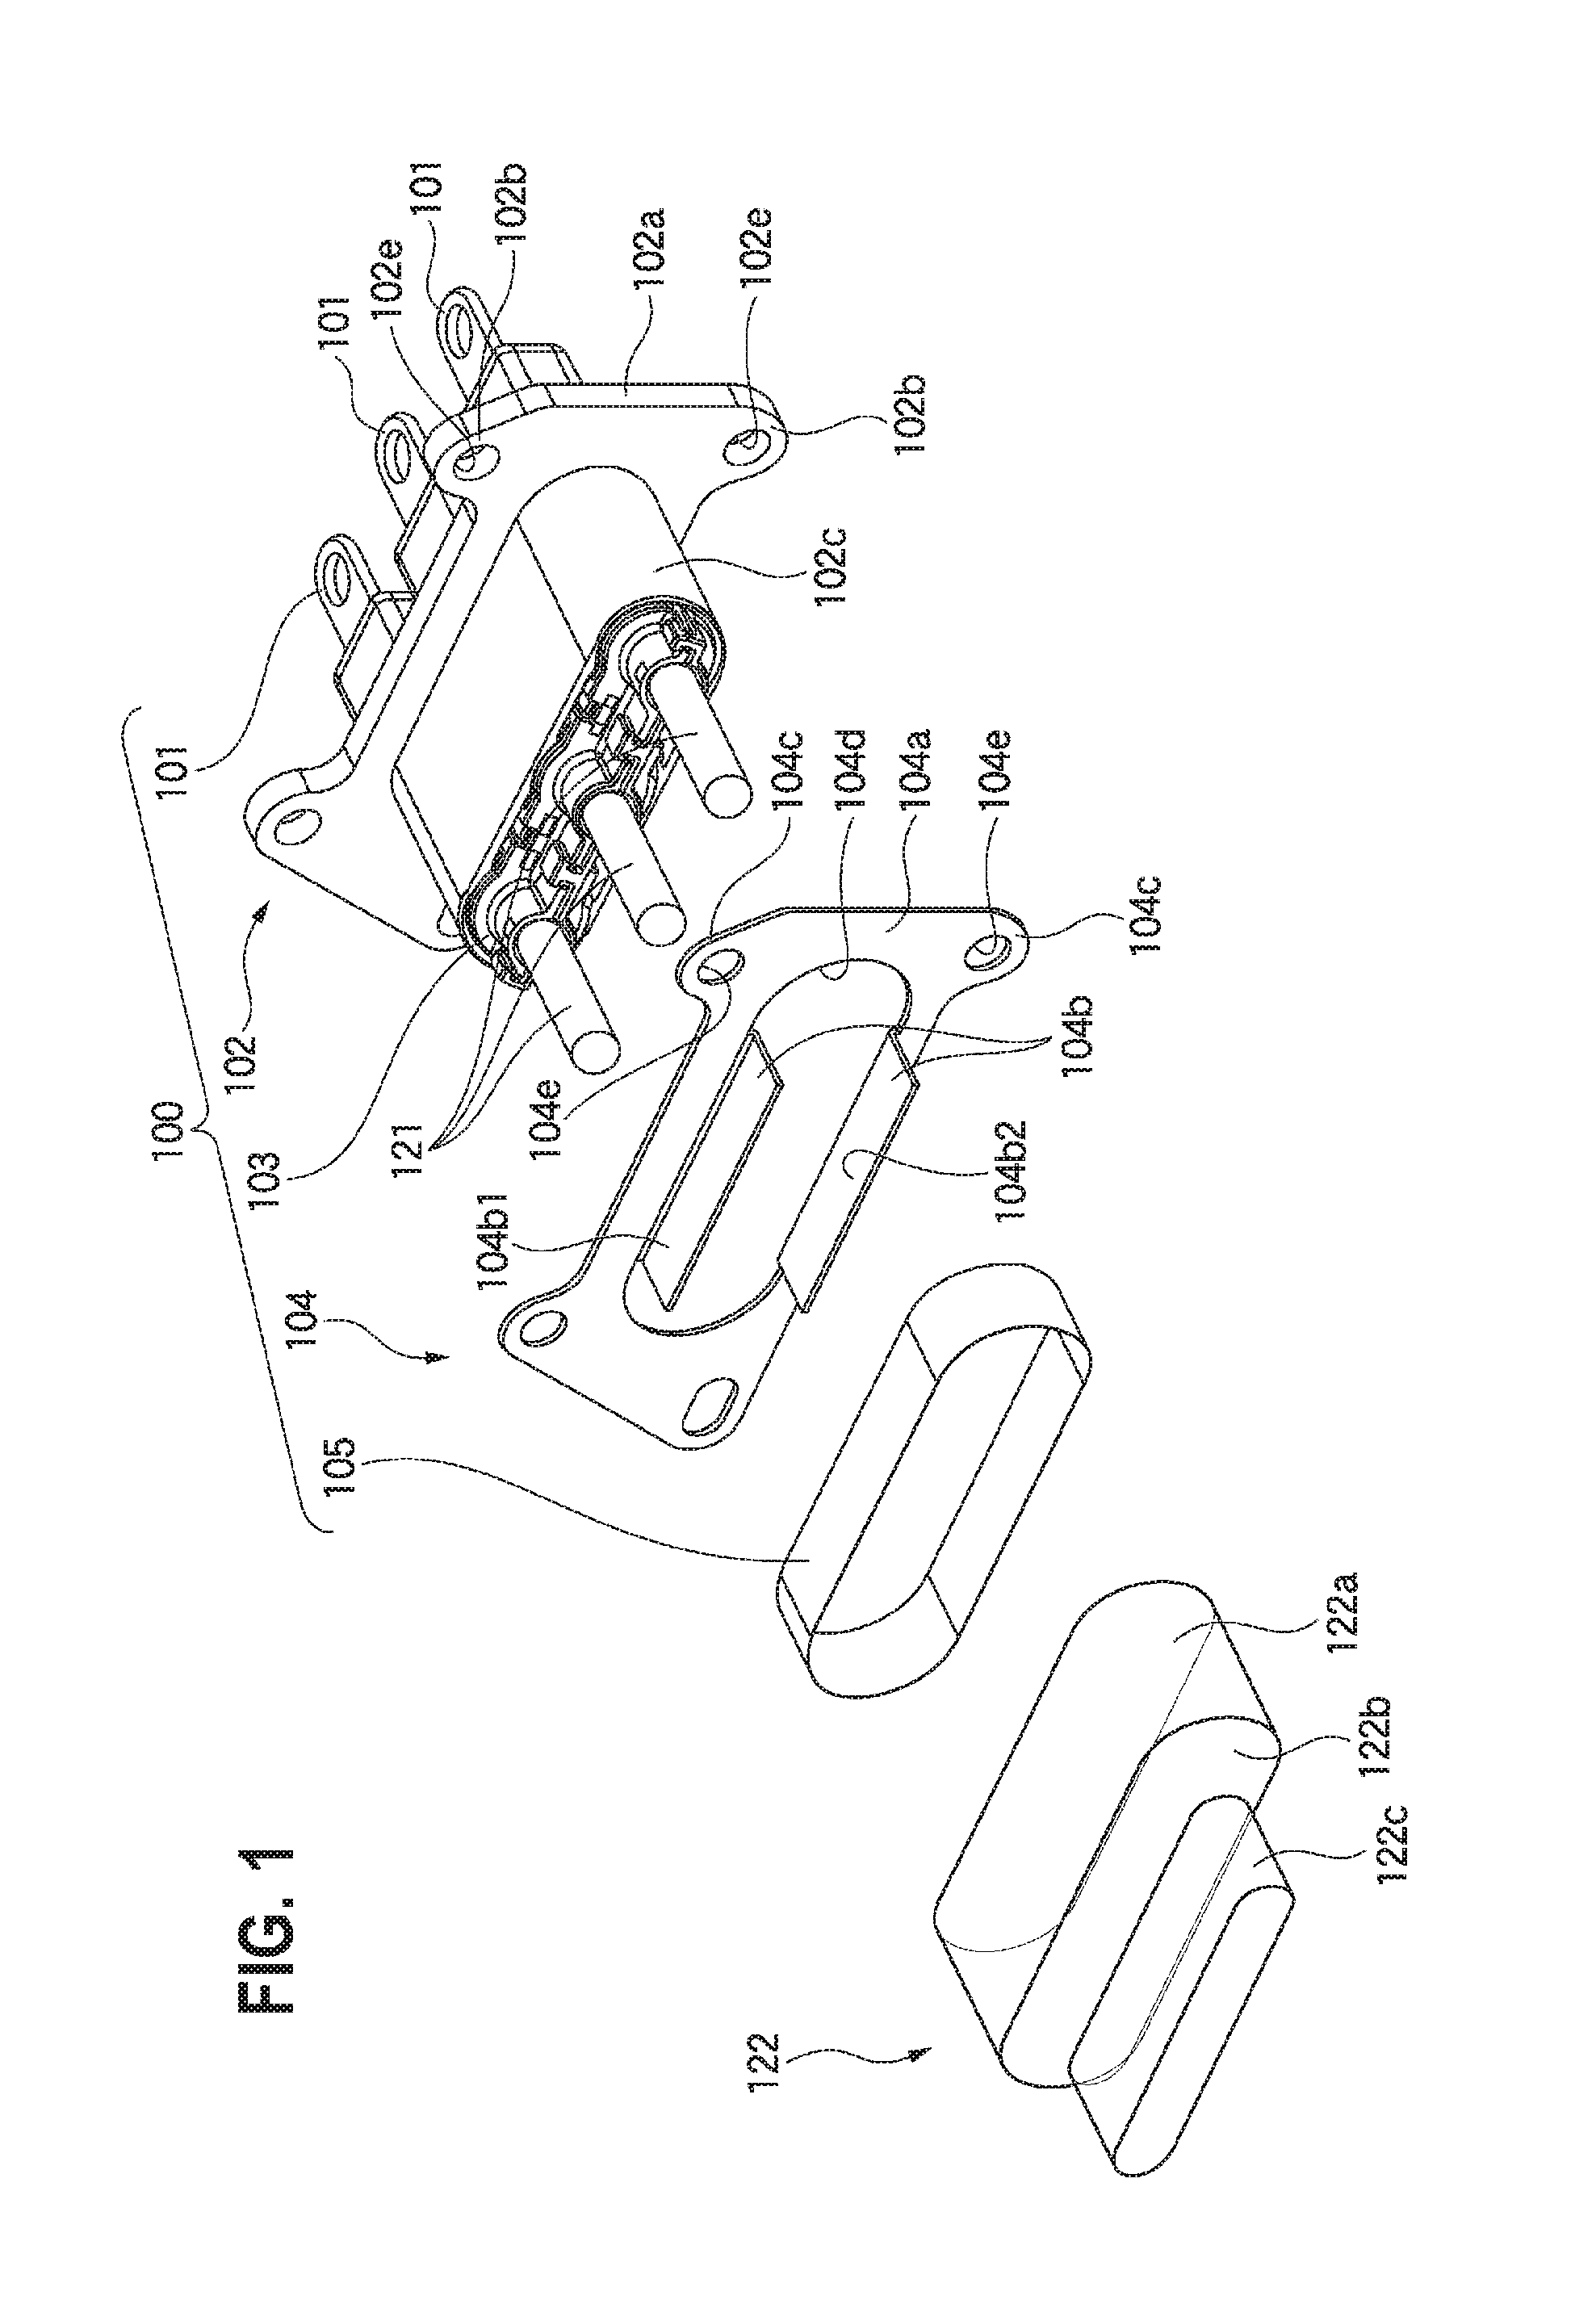 Shield Structure, Shield Shell, and Method for Manufacturing Shield Connector with Electric Wire